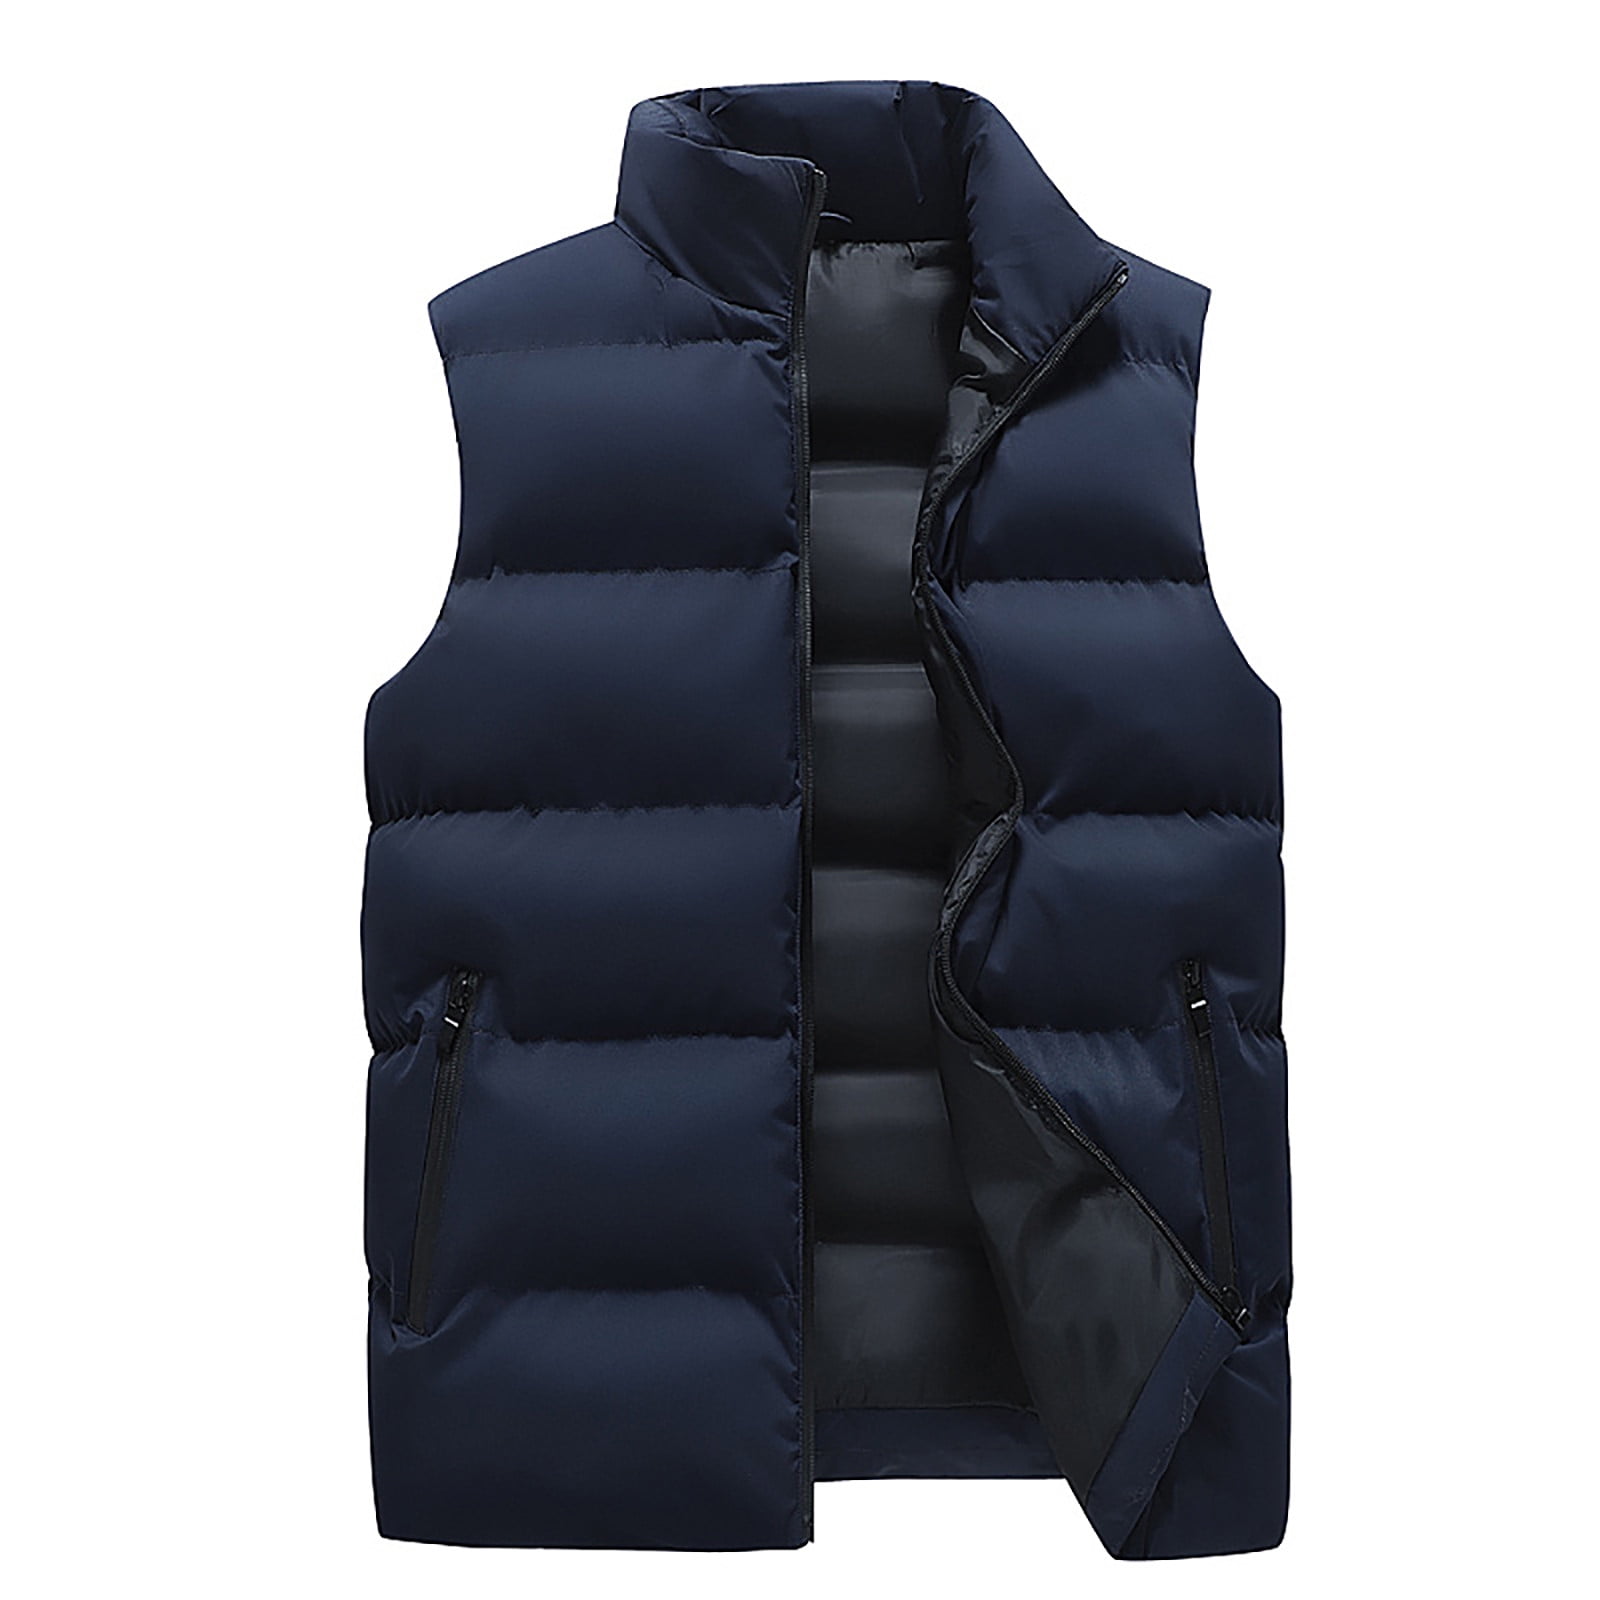 YYDGH Men's Winter Padded Puffer Vest Outdoor Stand Collar Sleeveless  Jacket Warm Casual Work Travel Quilted Waistcoat Black XXL